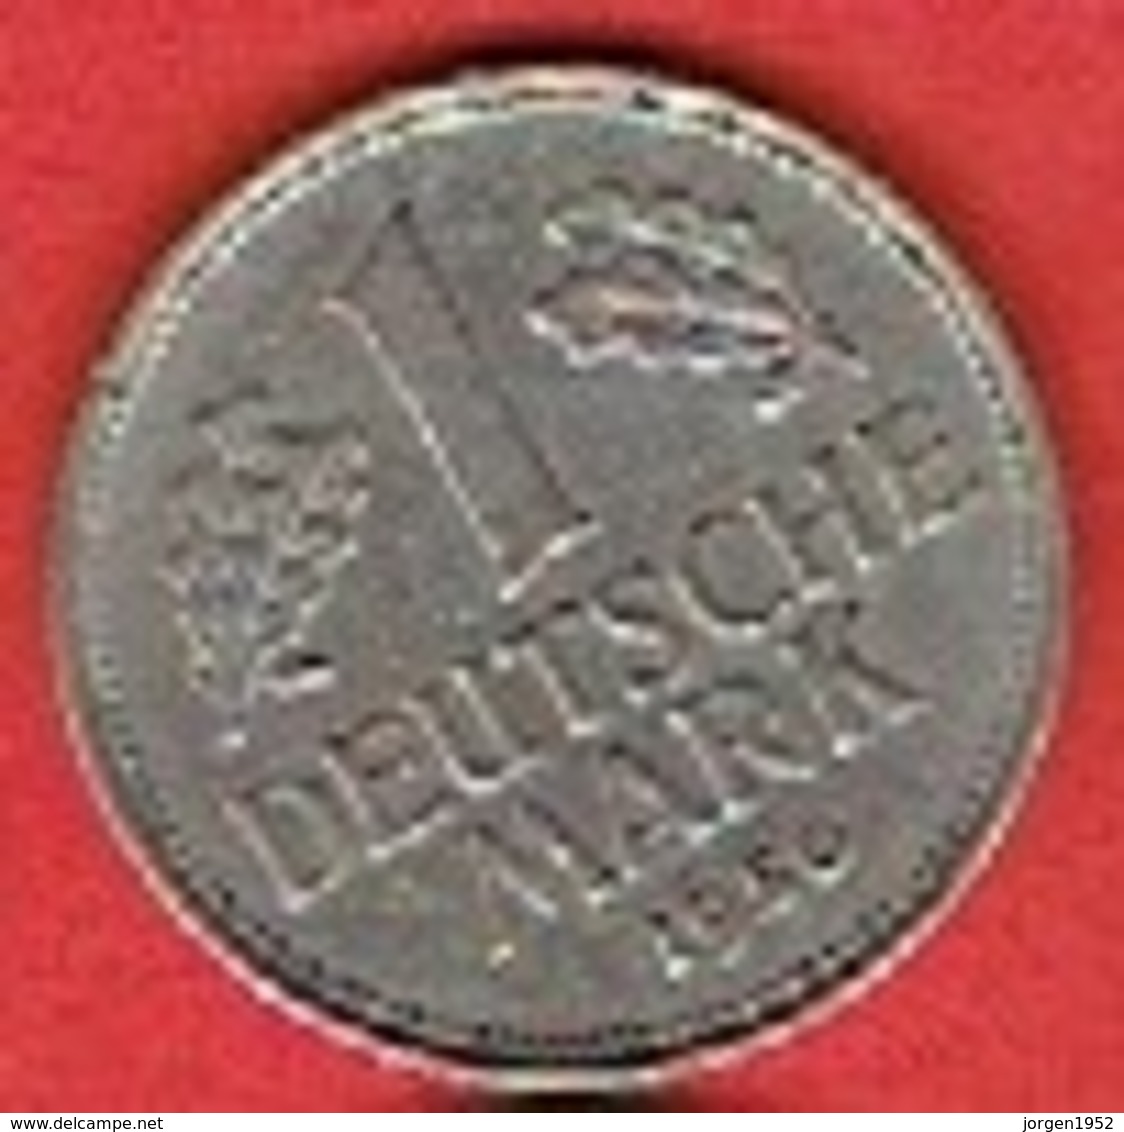 GERMANY # 1 MARK FROM 1950 - 1 Marco